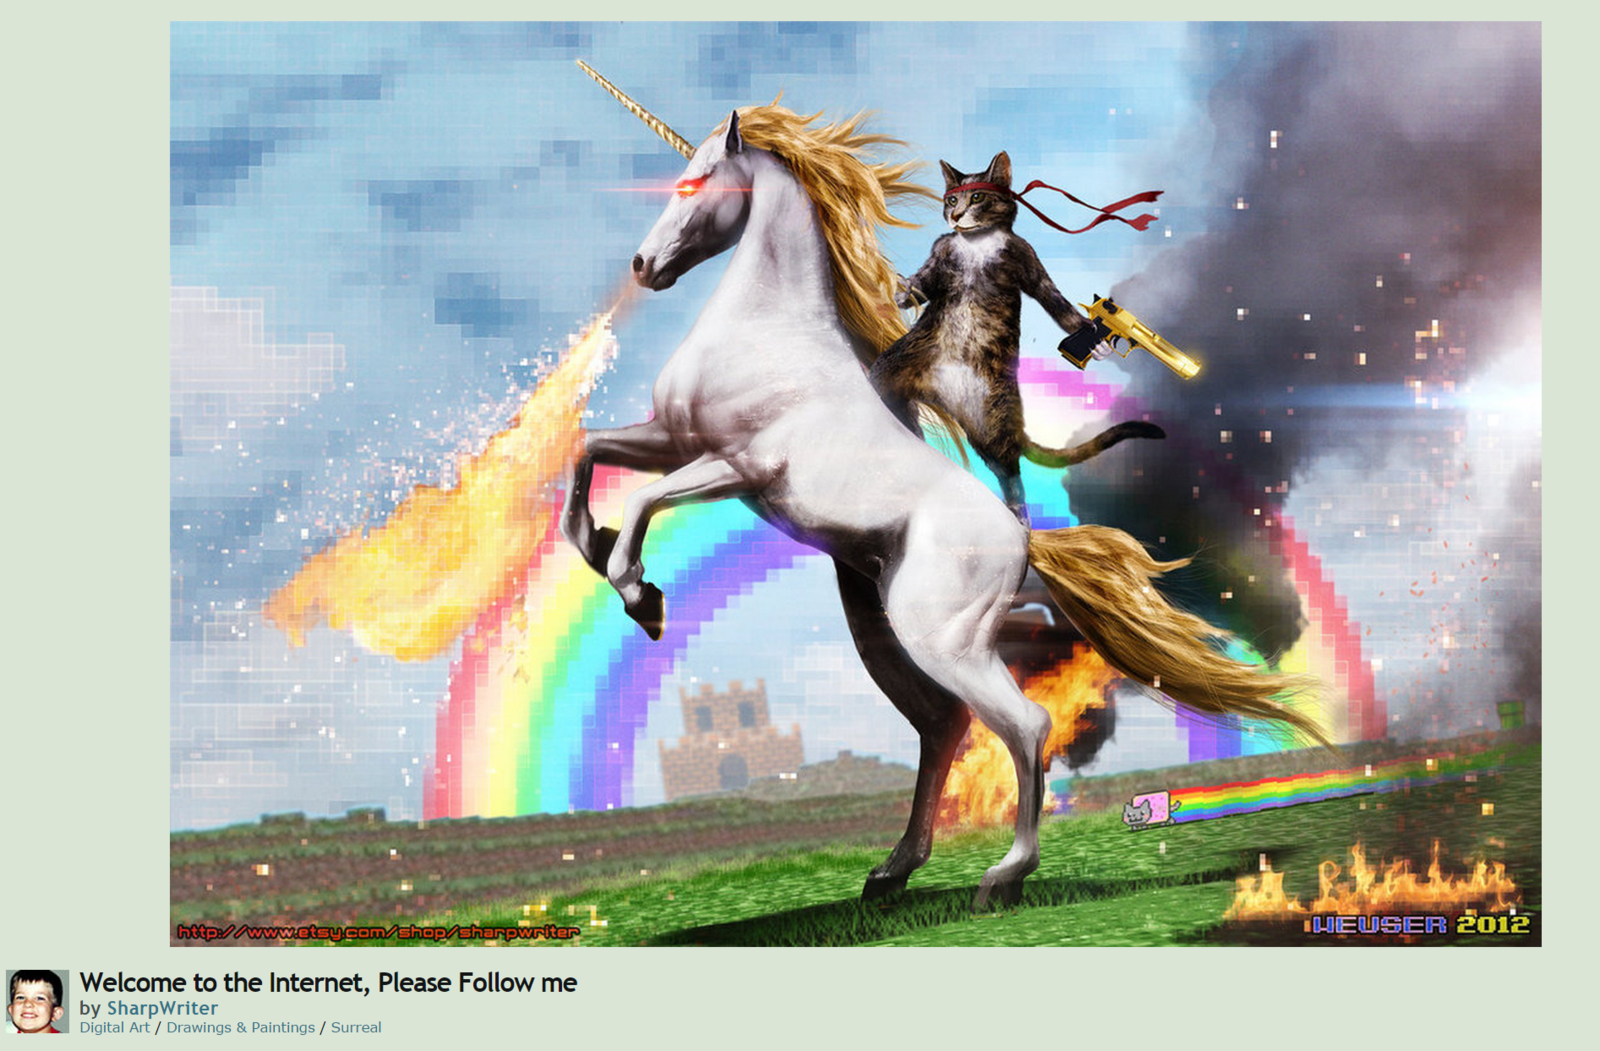 History of the Microsoft 'Ninja Cat on a Unicorn' and how to get